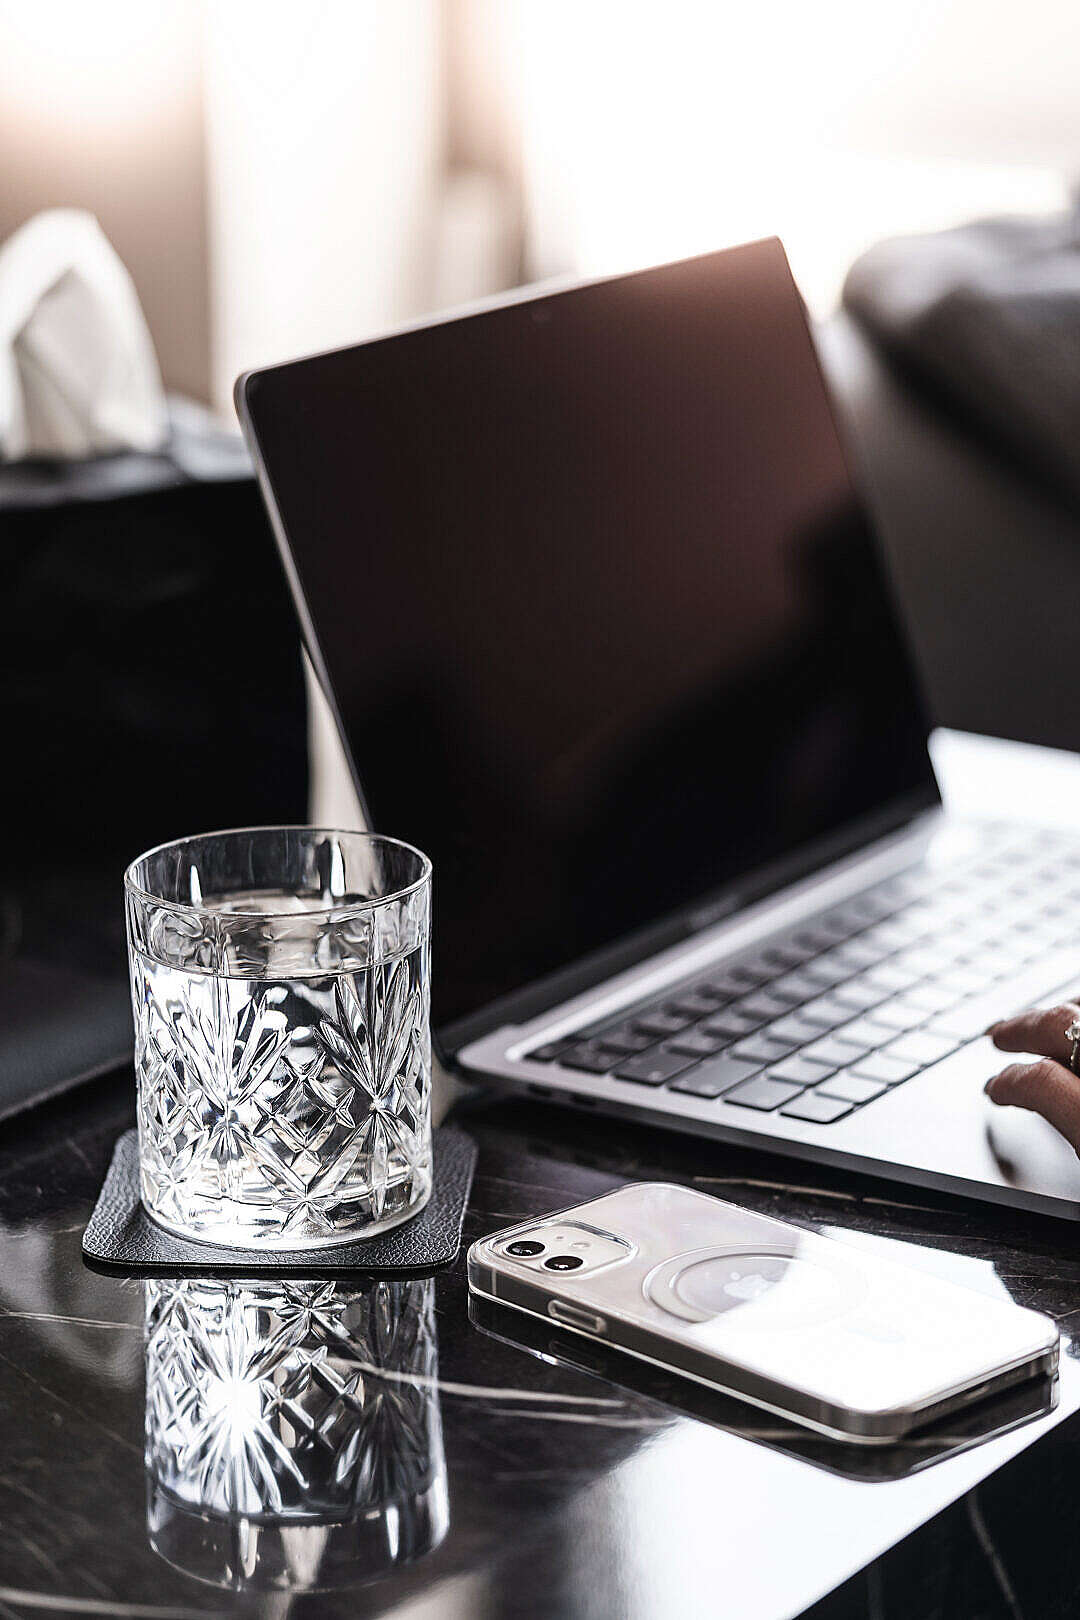 Download Laptop and Smartphone with a Crystal Glass of Water on a Luxury Marble Table FREE Stock Photo